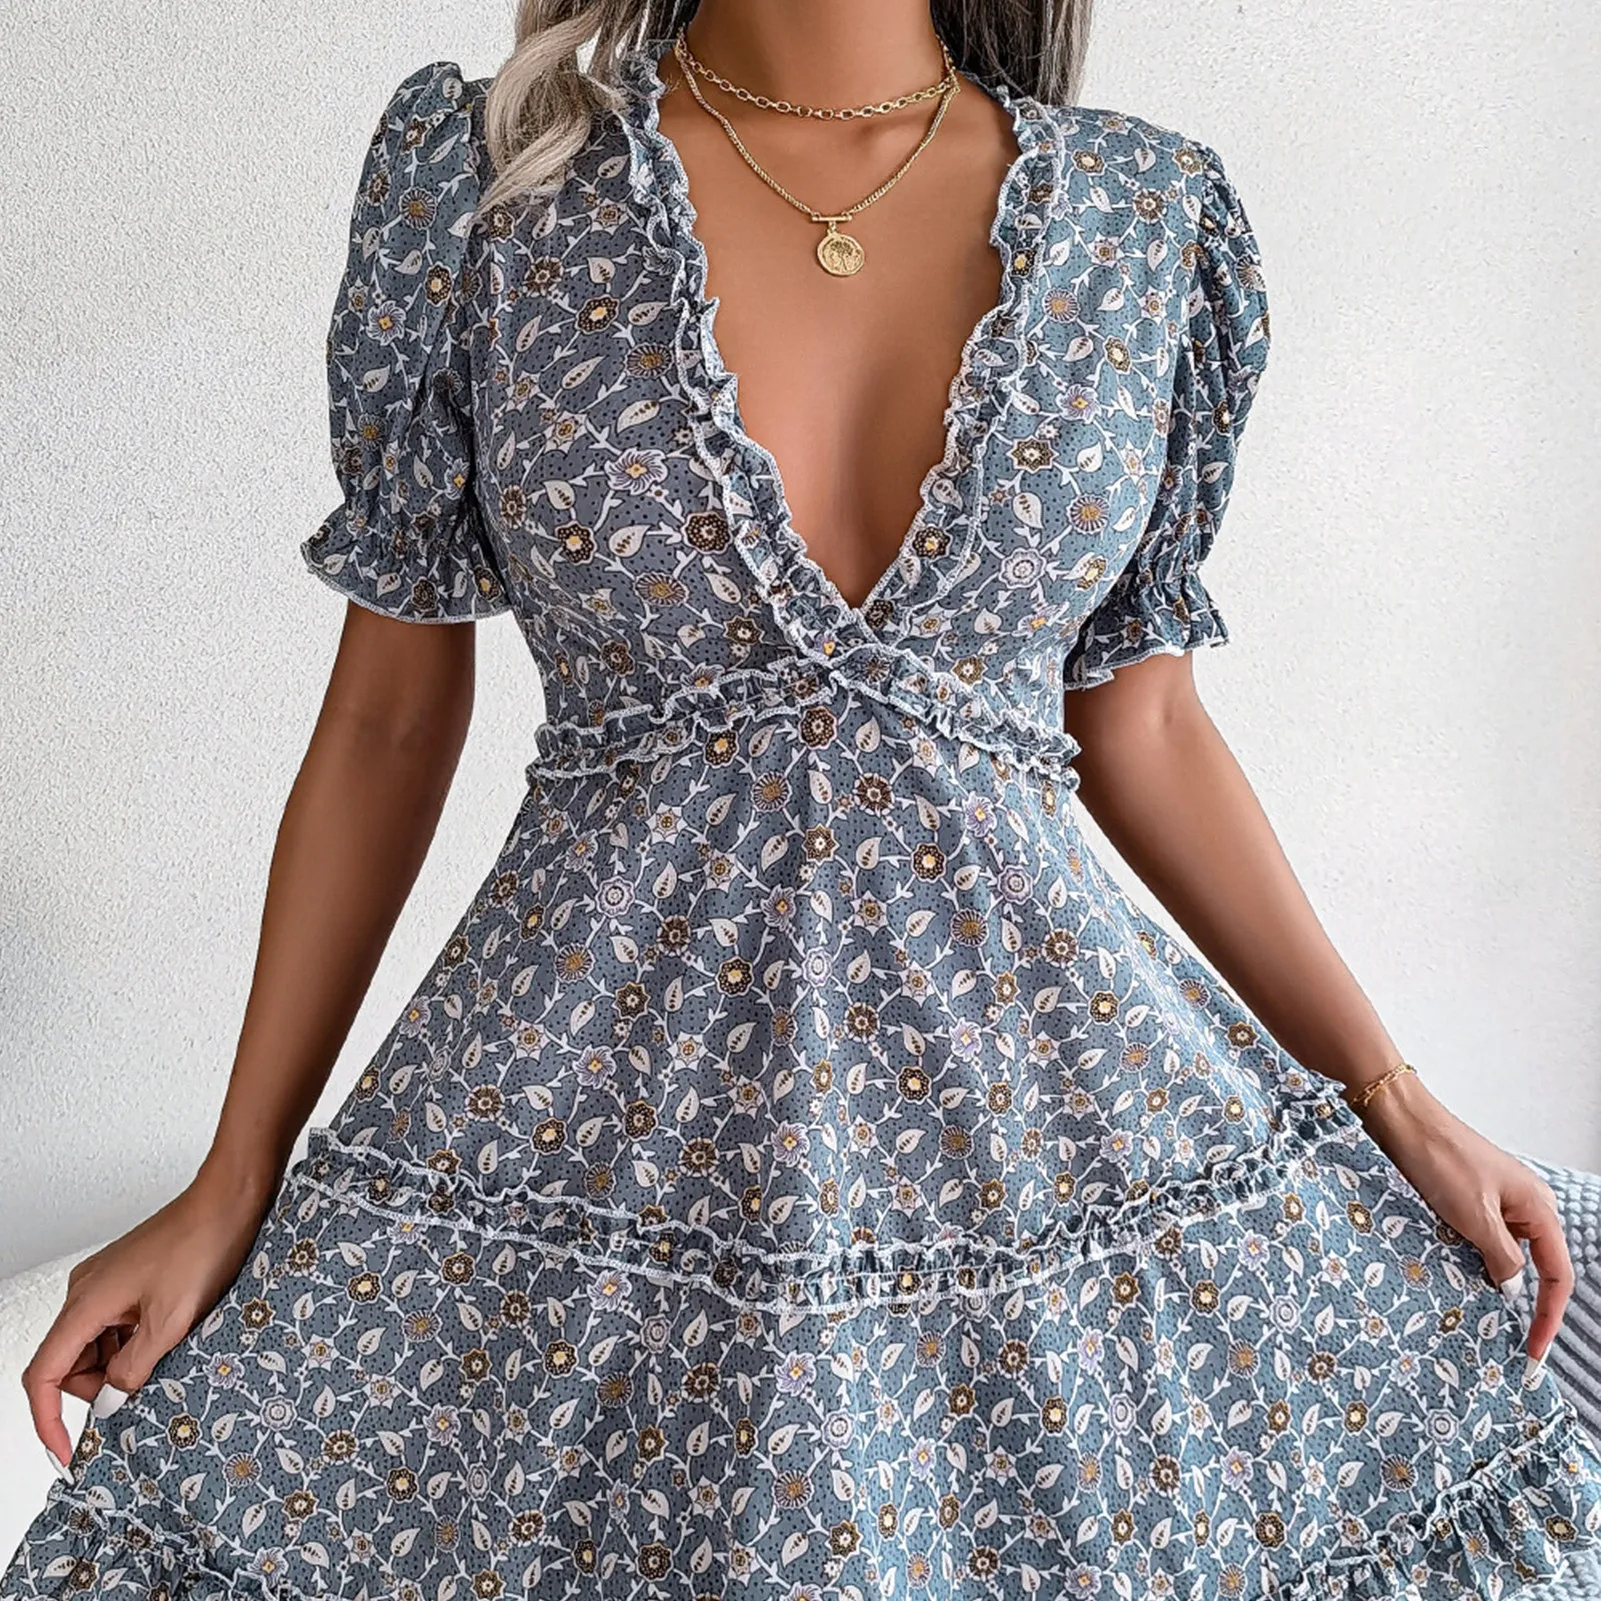 

Spring Summer Ladies Dress Deep V-neck Floral Print Mini Dress Large Swing Fashion European Wood Ears Ruffles for Cocktail Party